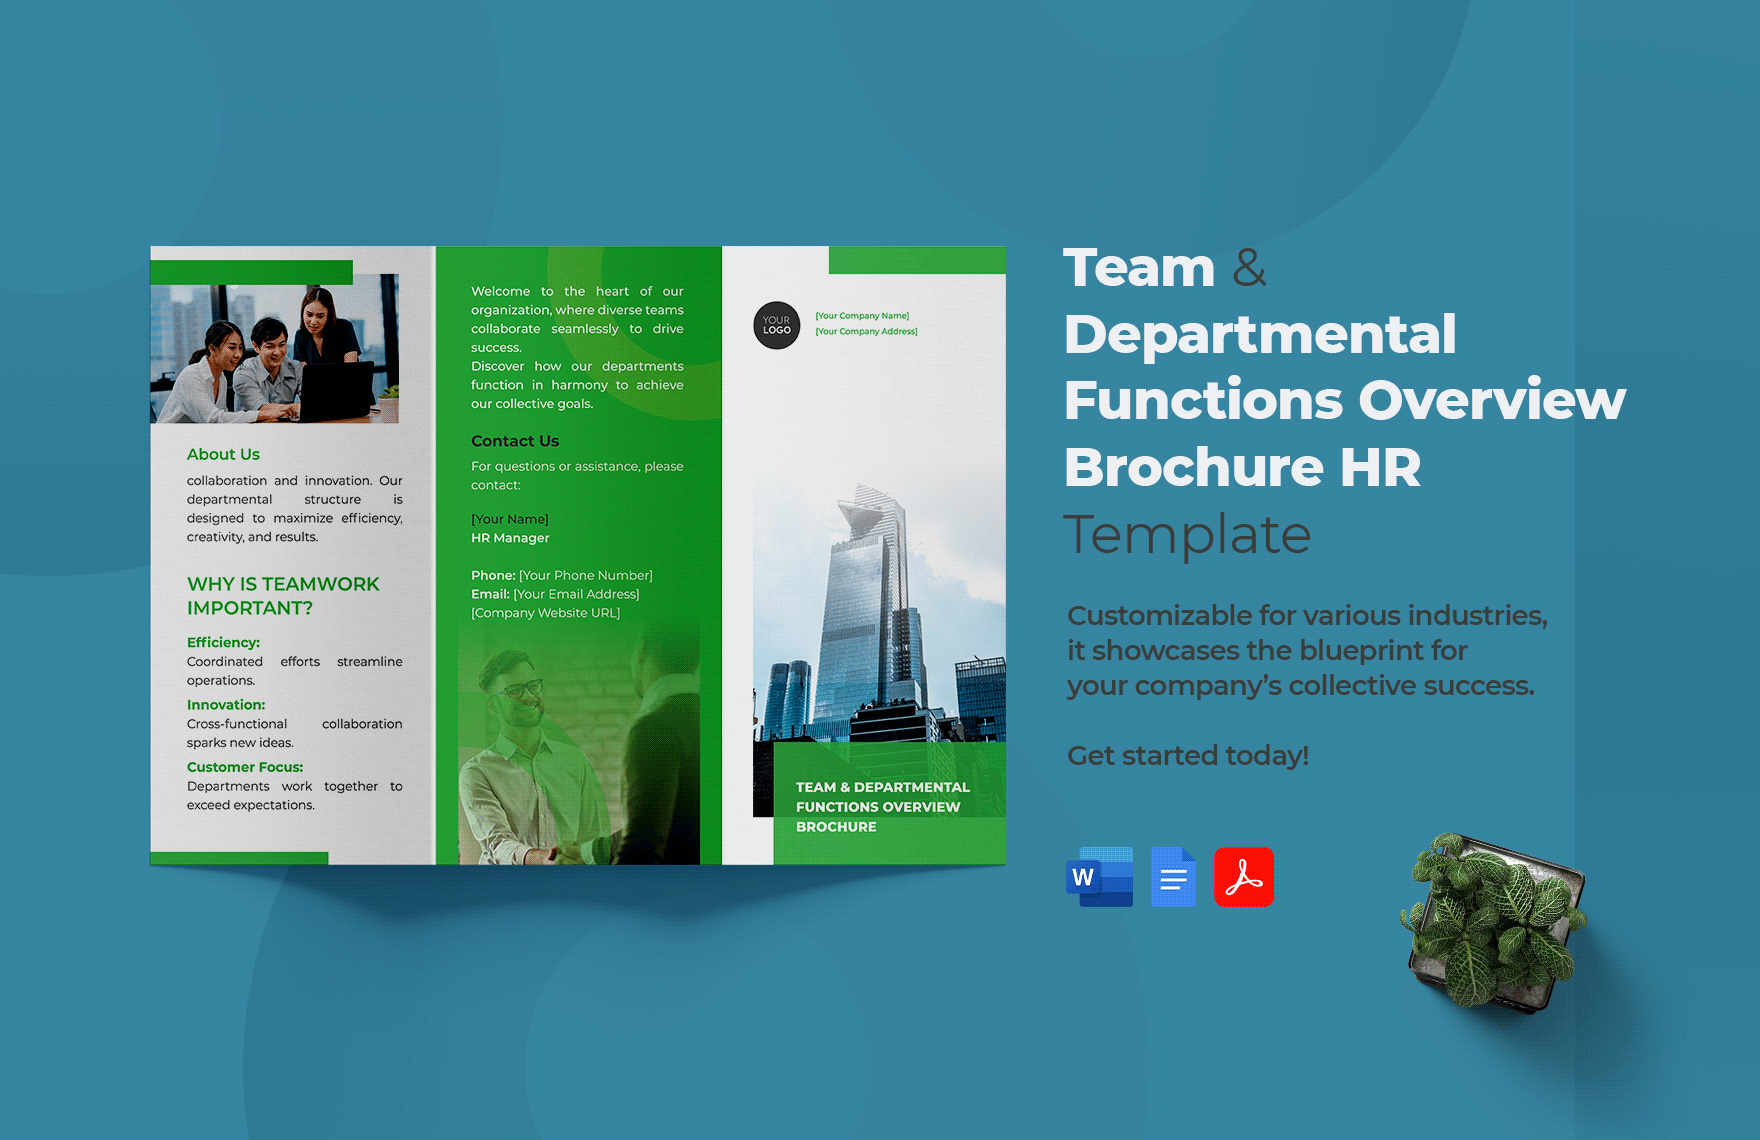 Team and Departmental Functions Overview Brochure HR Template